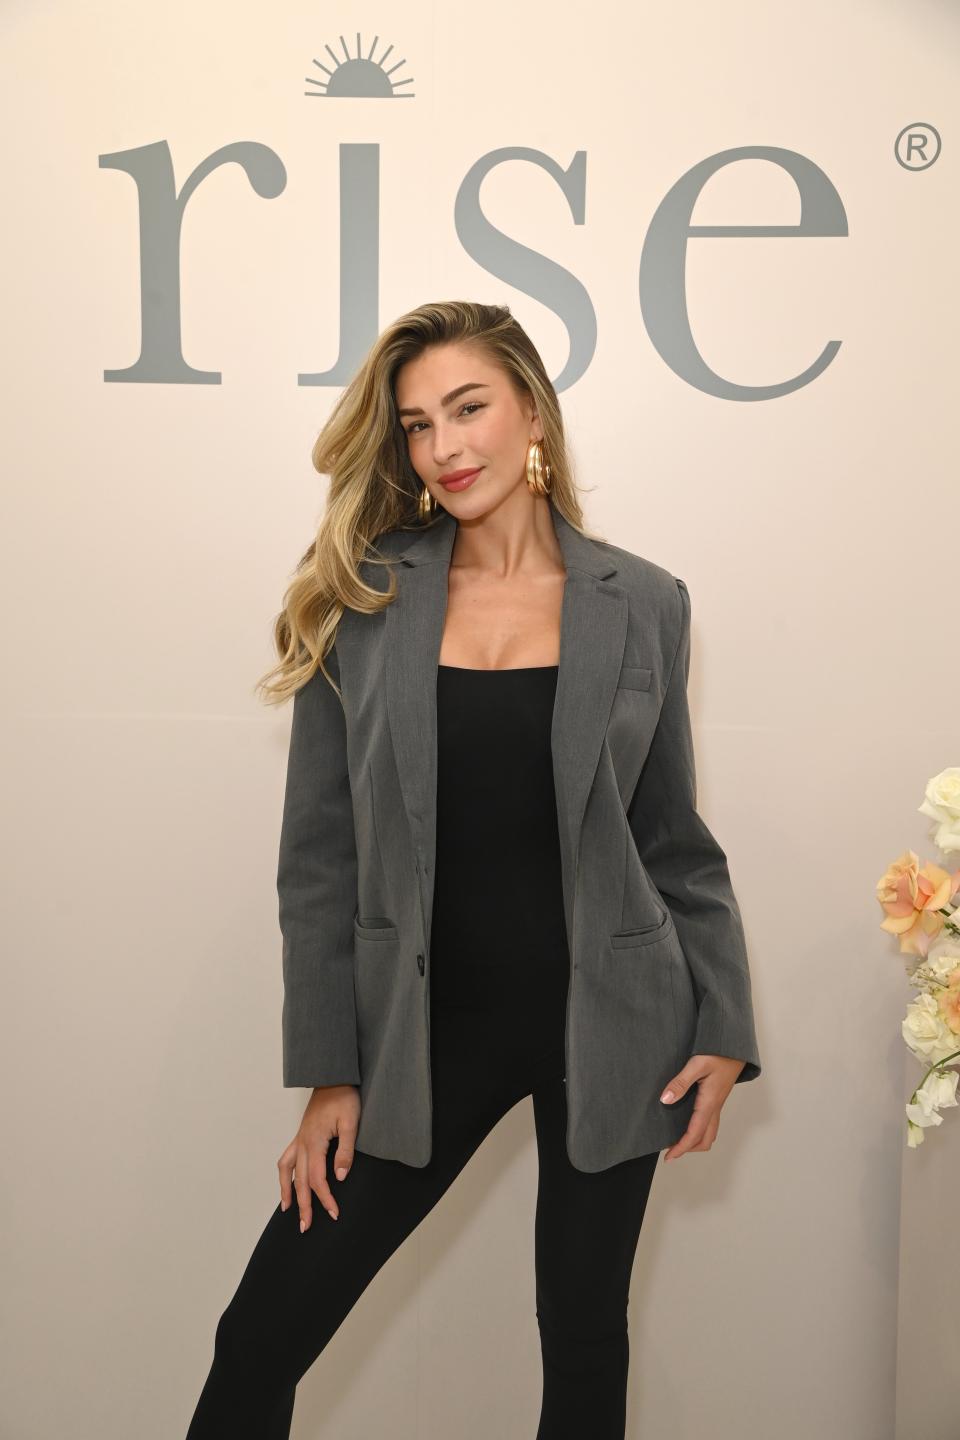 Zara McDermott, pictured at the launch of her new clothing brand Rise on 17 April, 2024. (Getty Images)